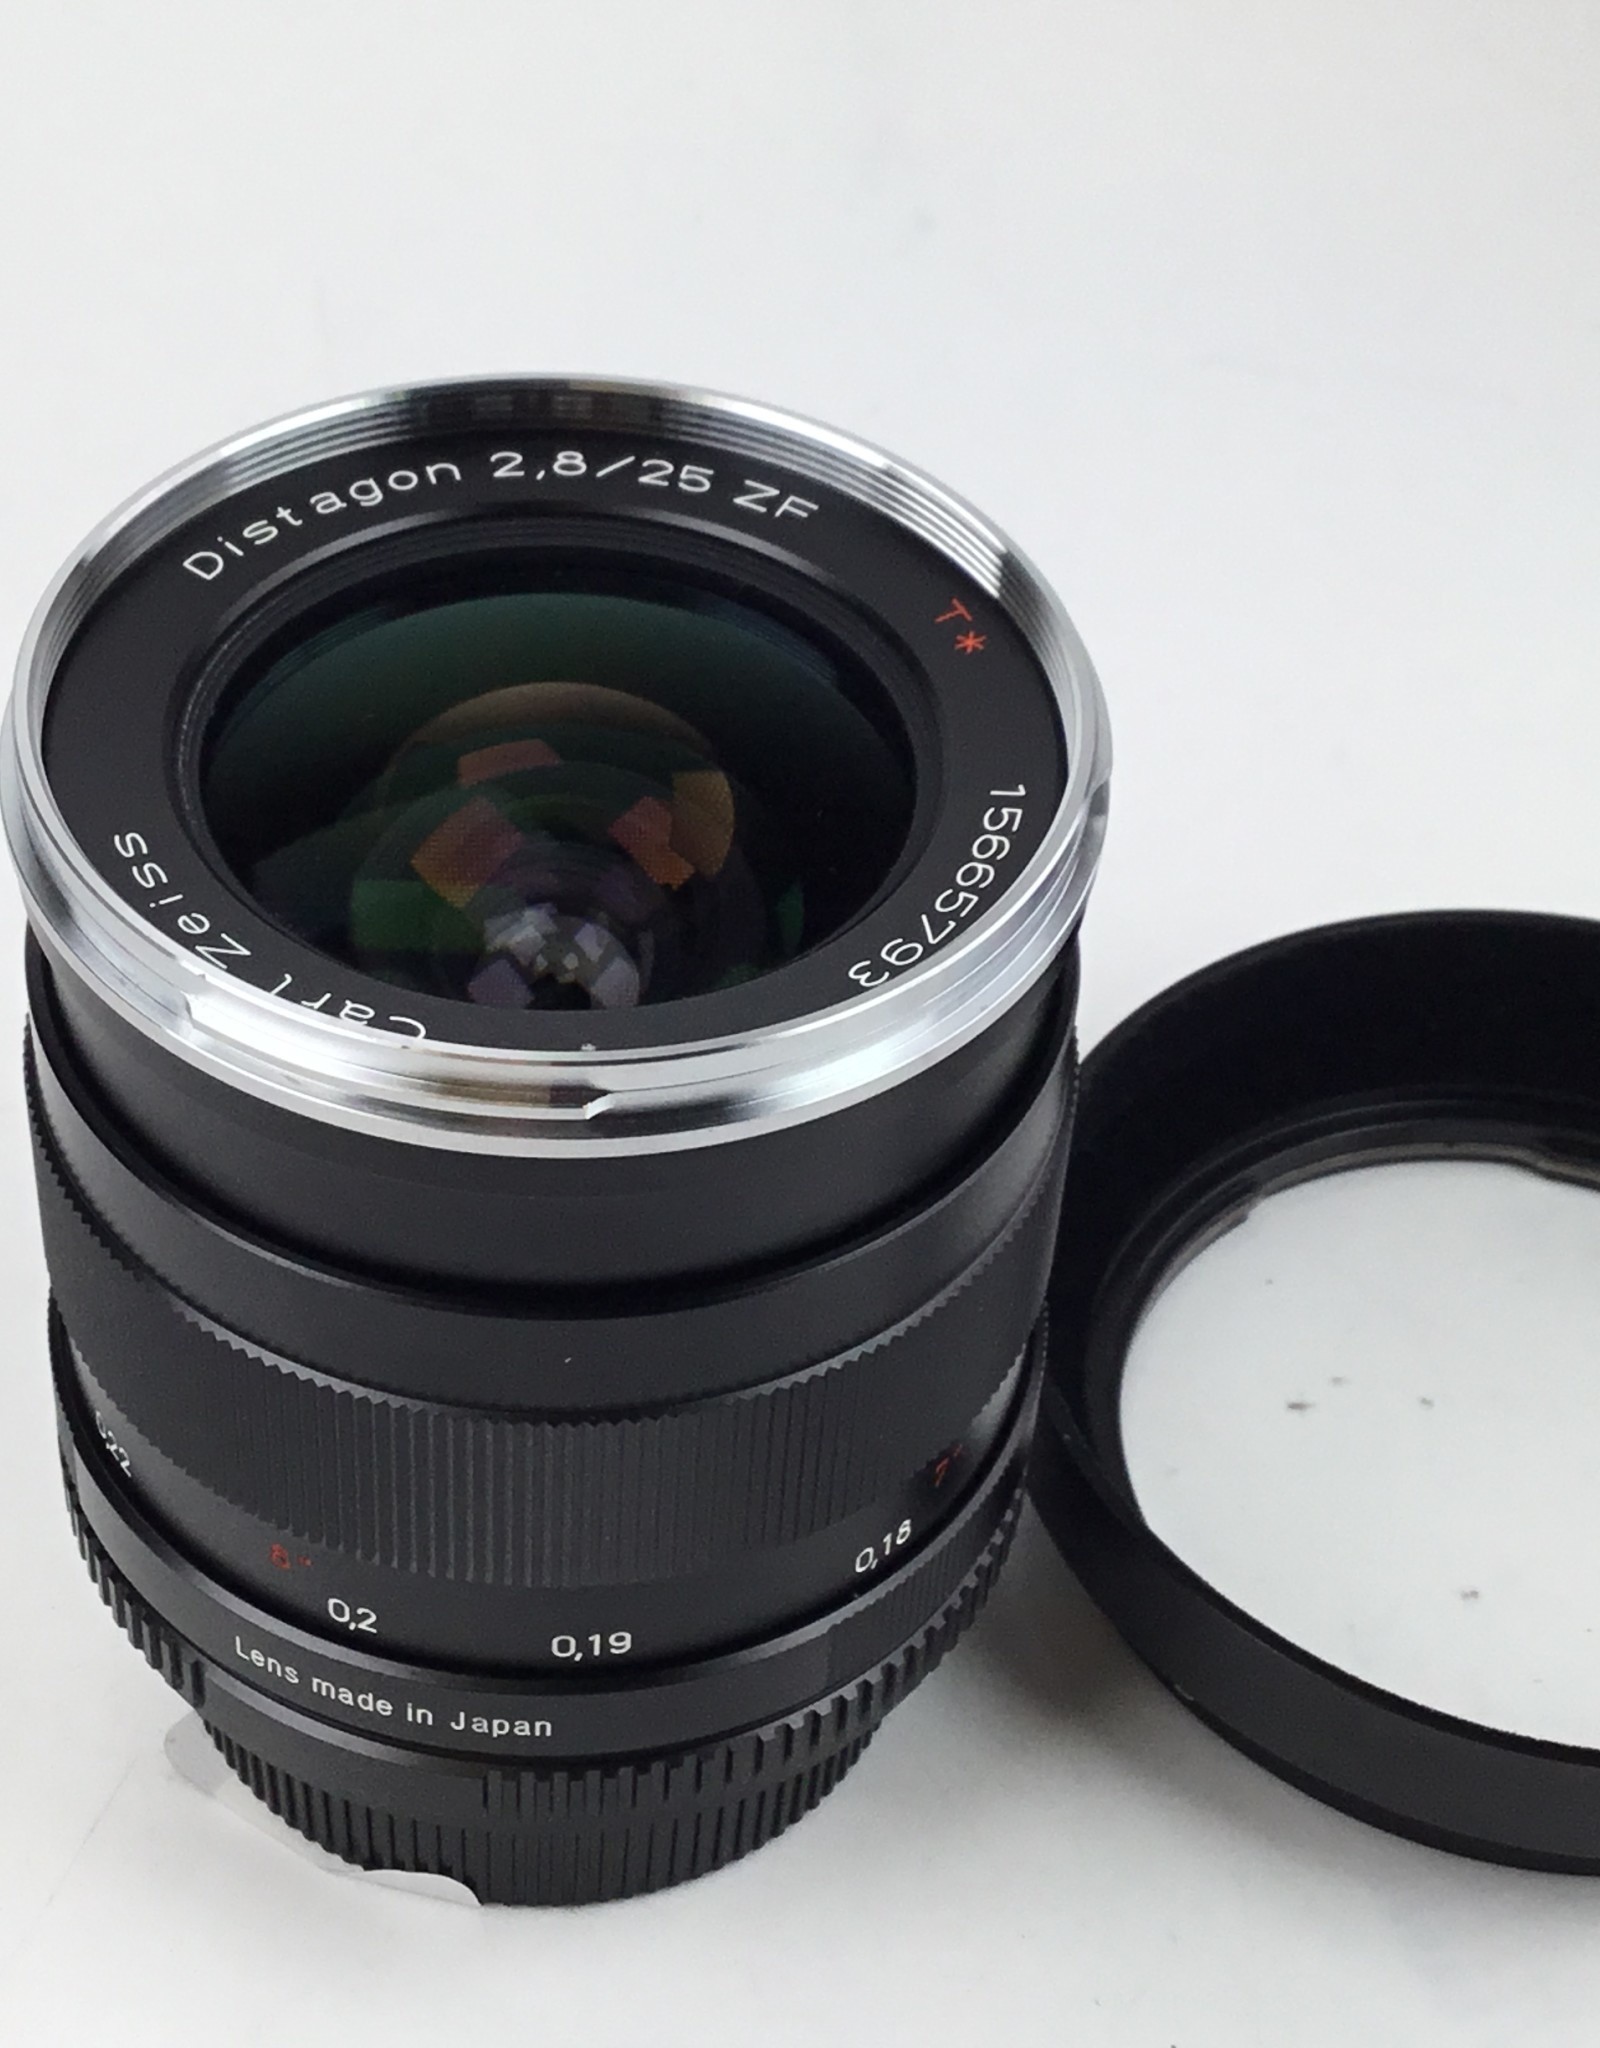 ZEISS Zeiss 25 F2.8 ZF Distagon *T Lens for Nikon F Used Good